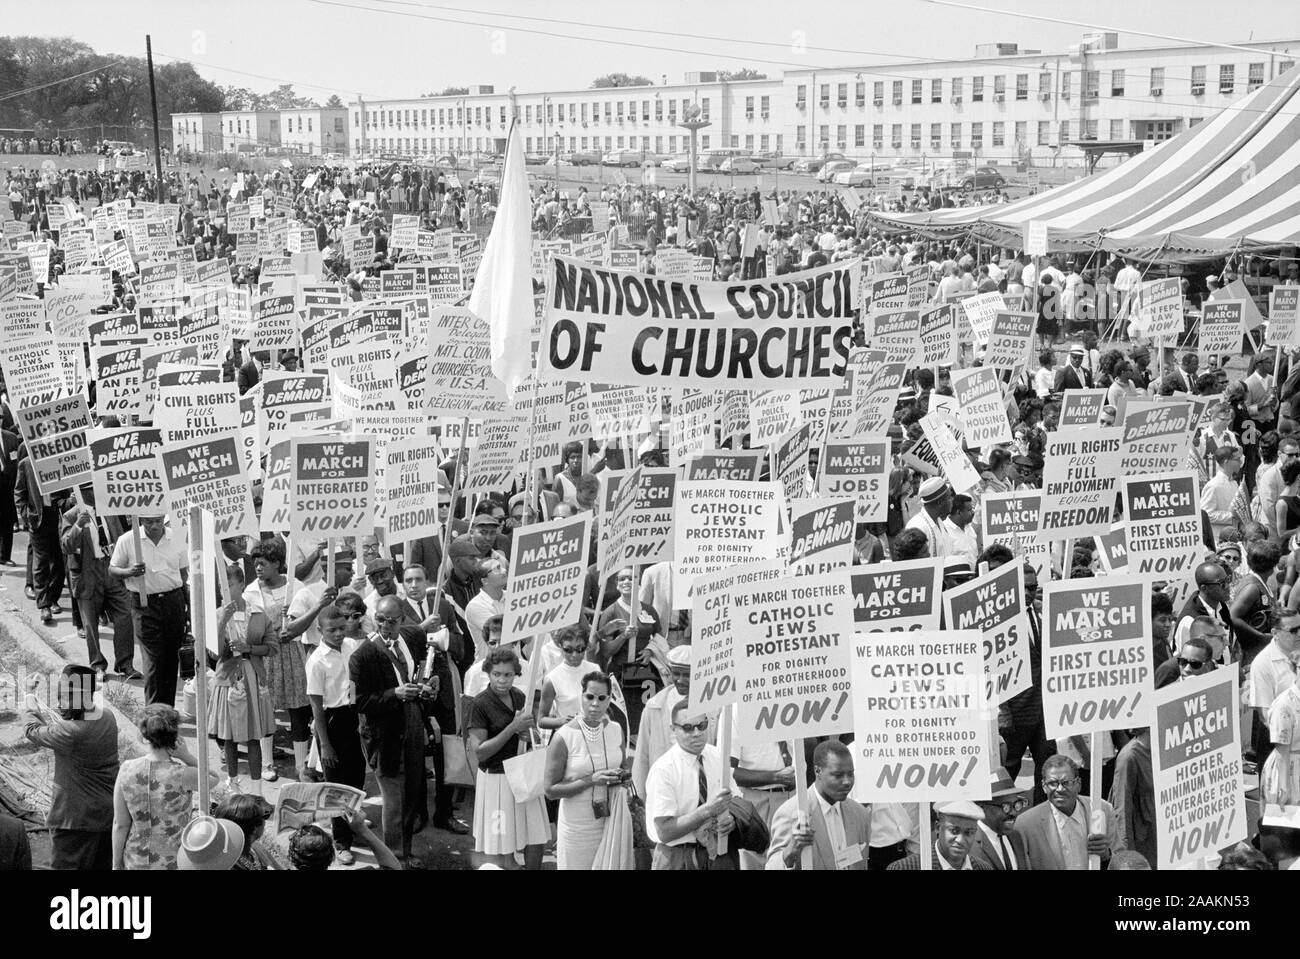 Marchers and Signs, March on Washington for Jobs and Freedom, Washington,  D.C., USA, photograph by Marion S. Trikosko, August 28, 1963 Stock Photo -  Alamy